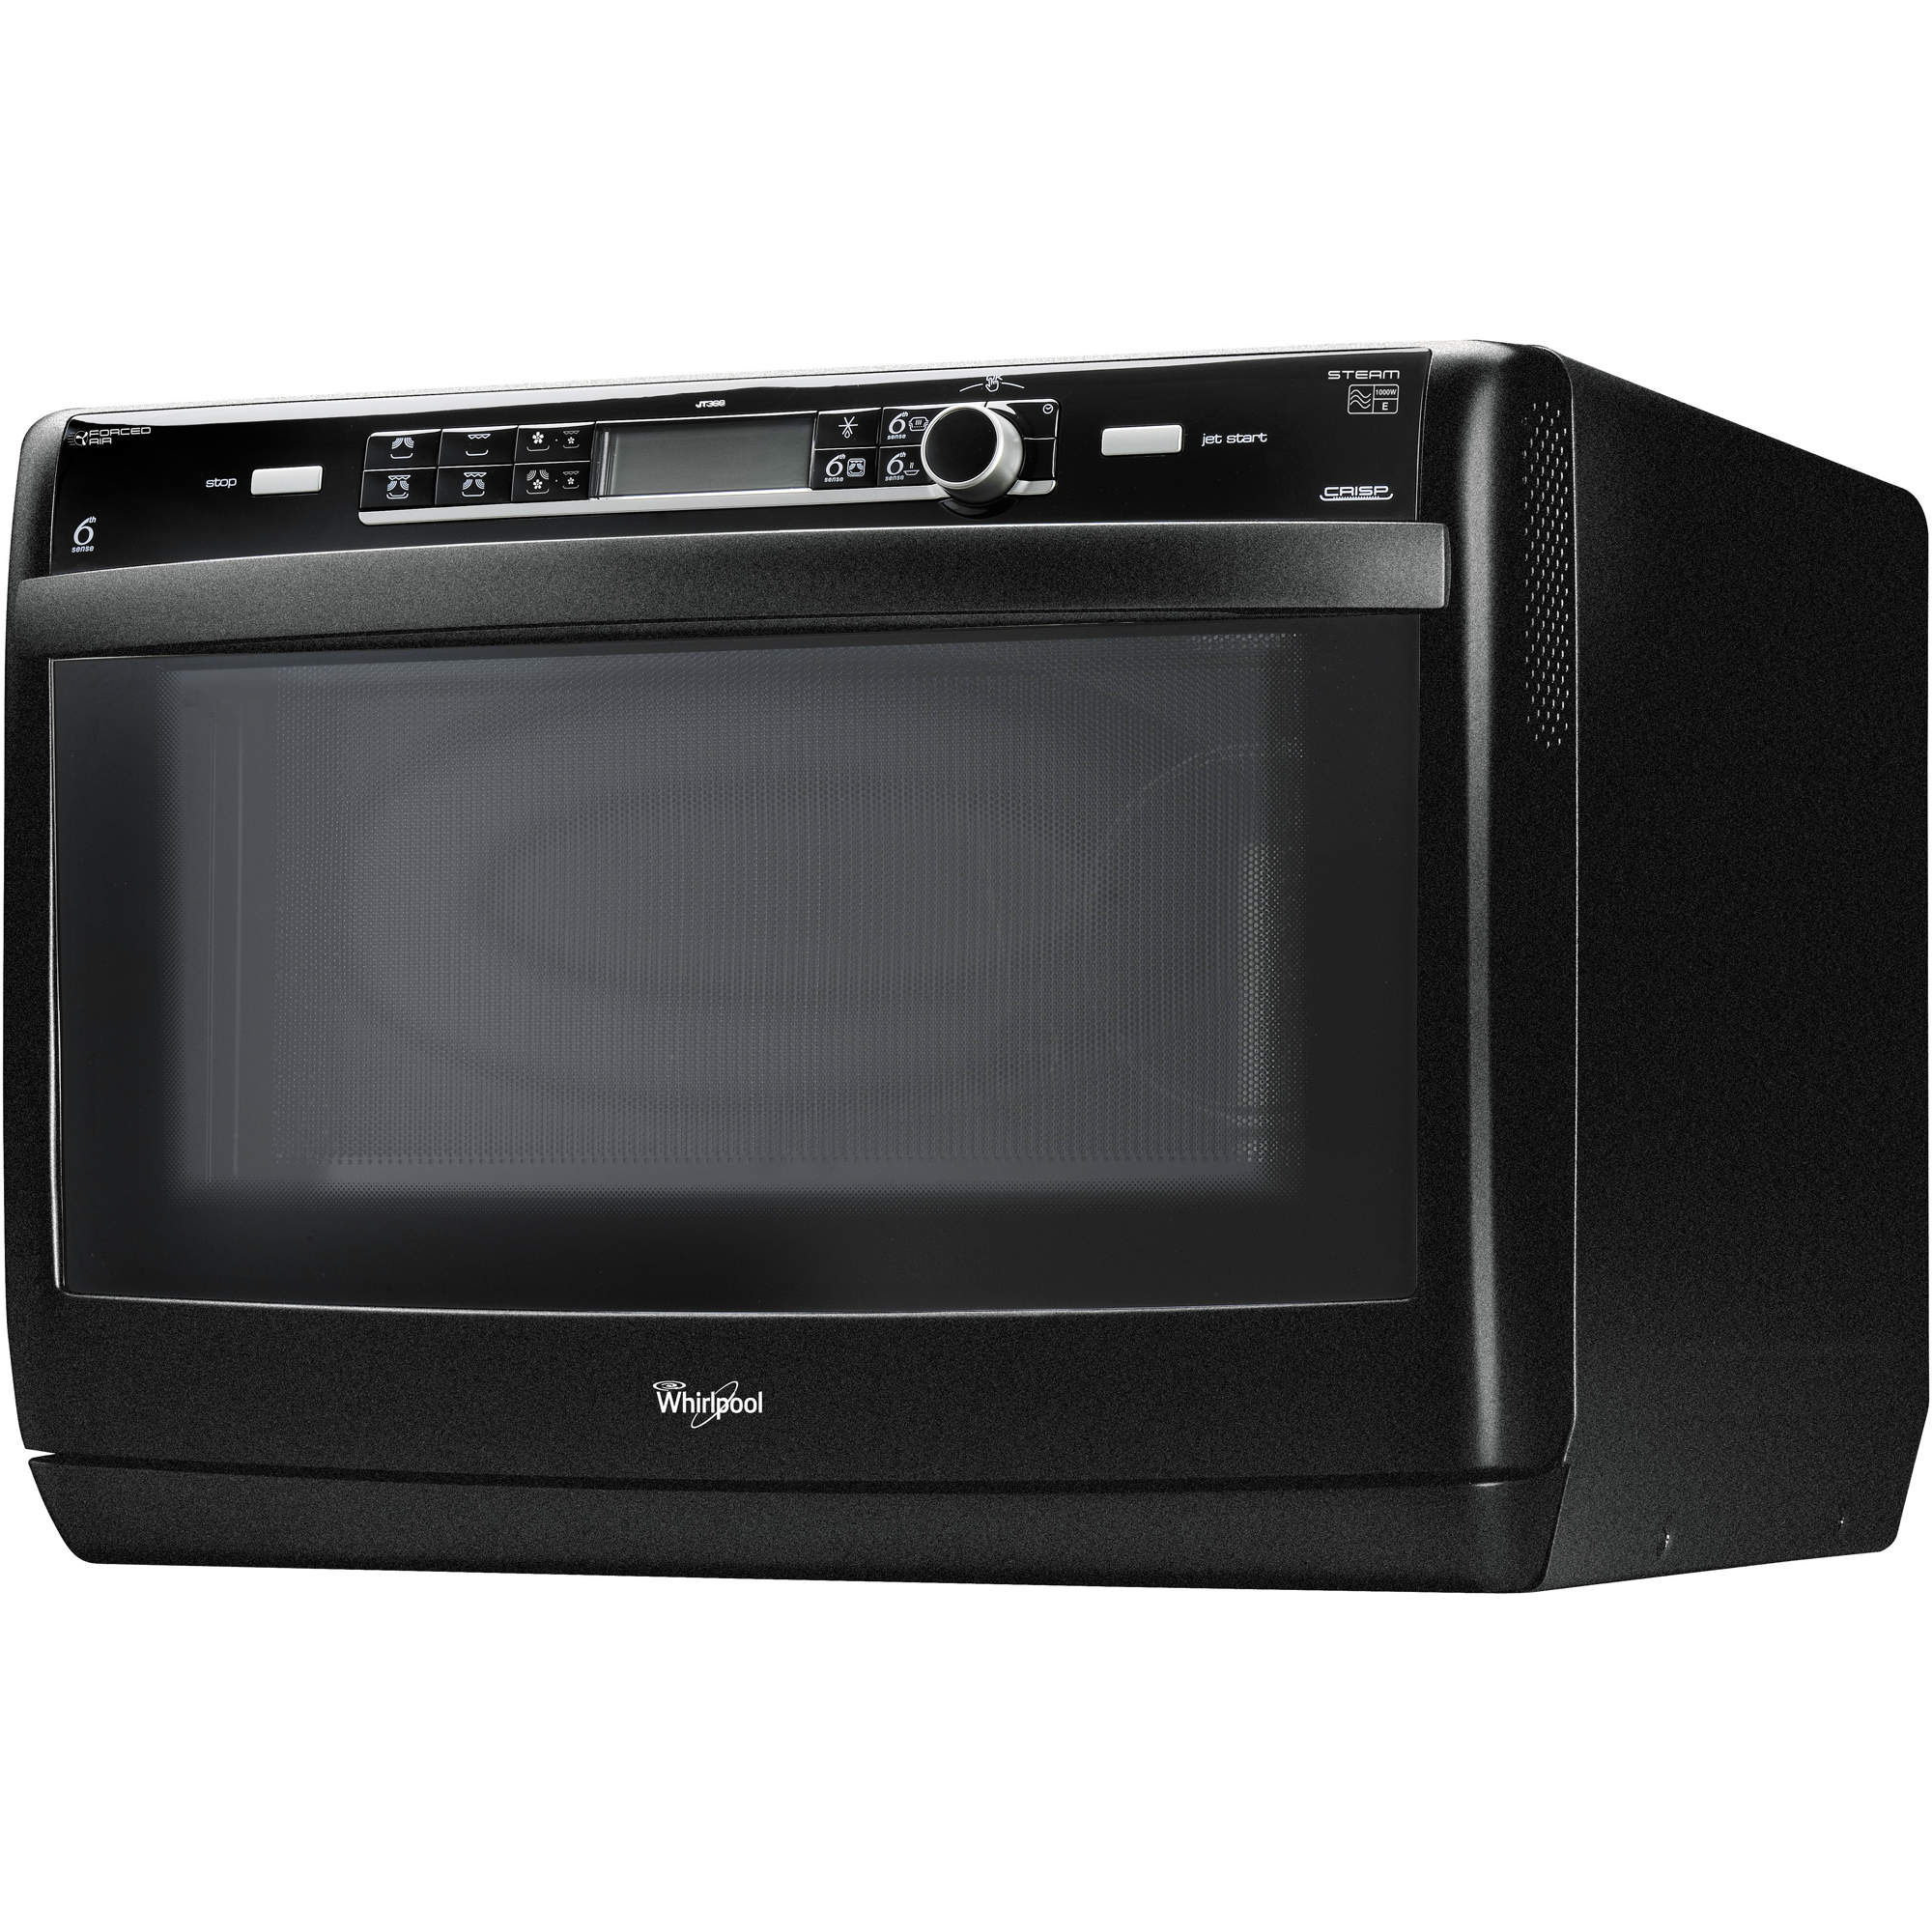 Full Combination Microwave Oven JT 369 MIR